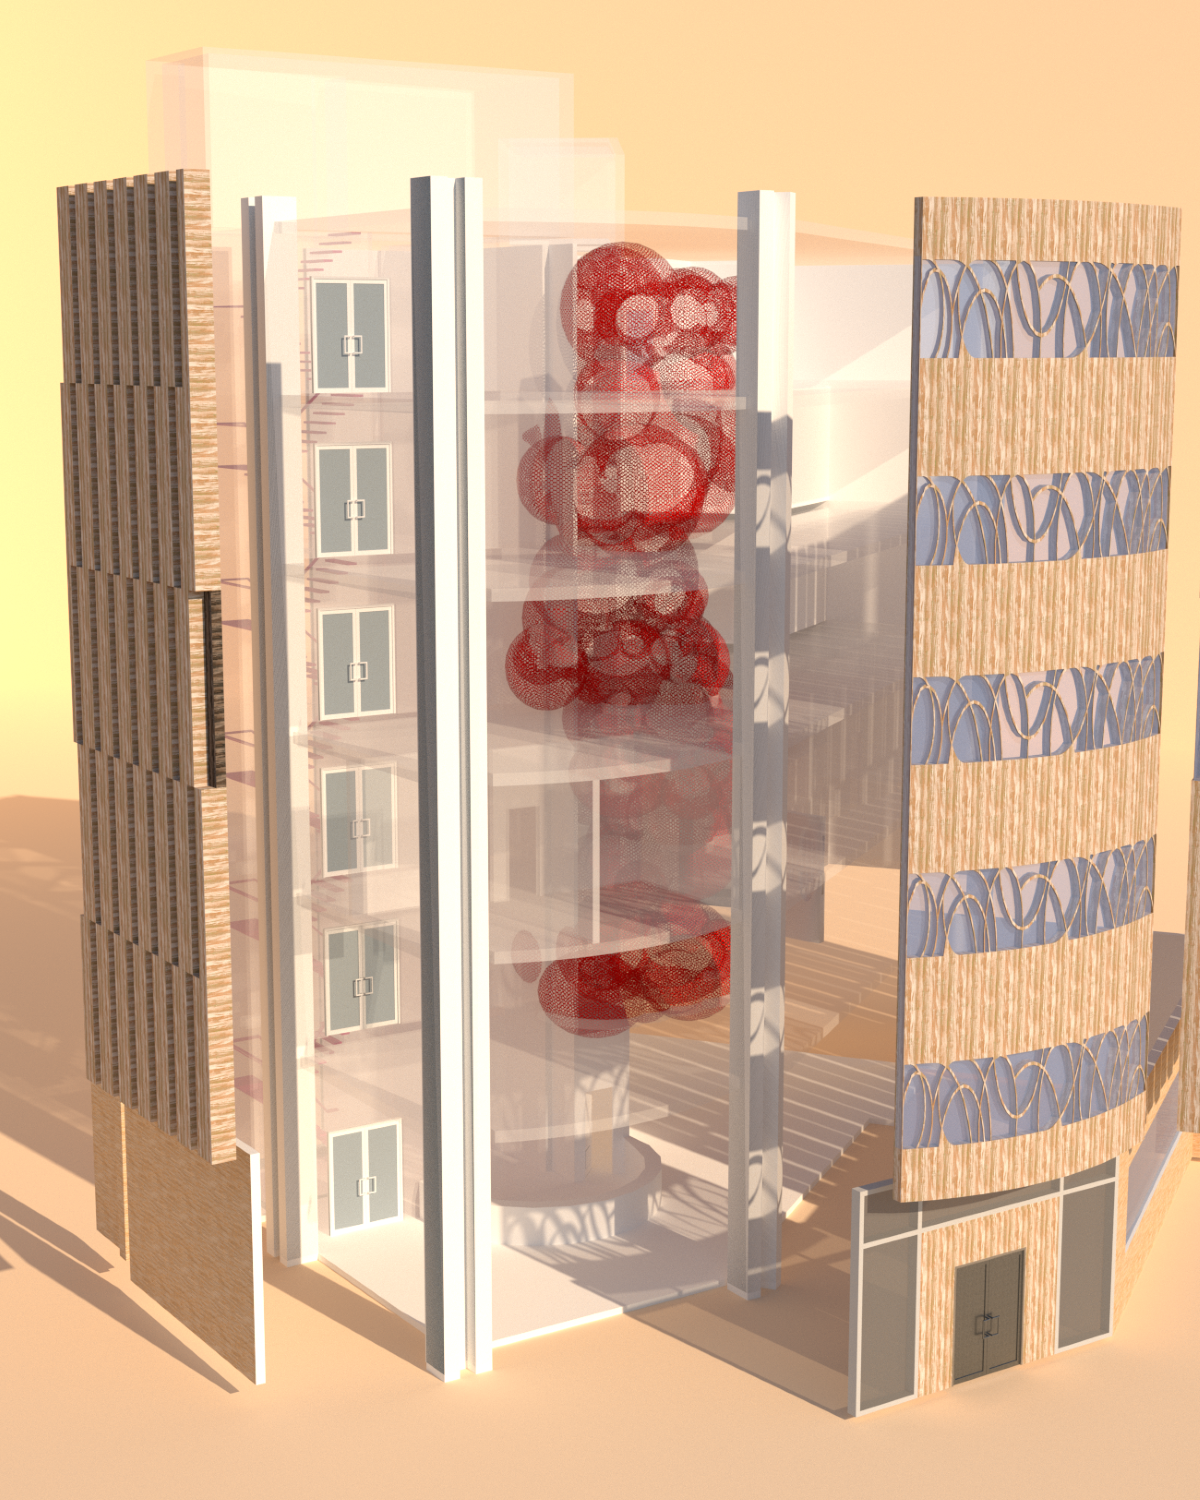 Illustration of a modern multi-storey building with faded floors allowing an unobstructed view of a mesh and net sculpture accessible on multiple floors.